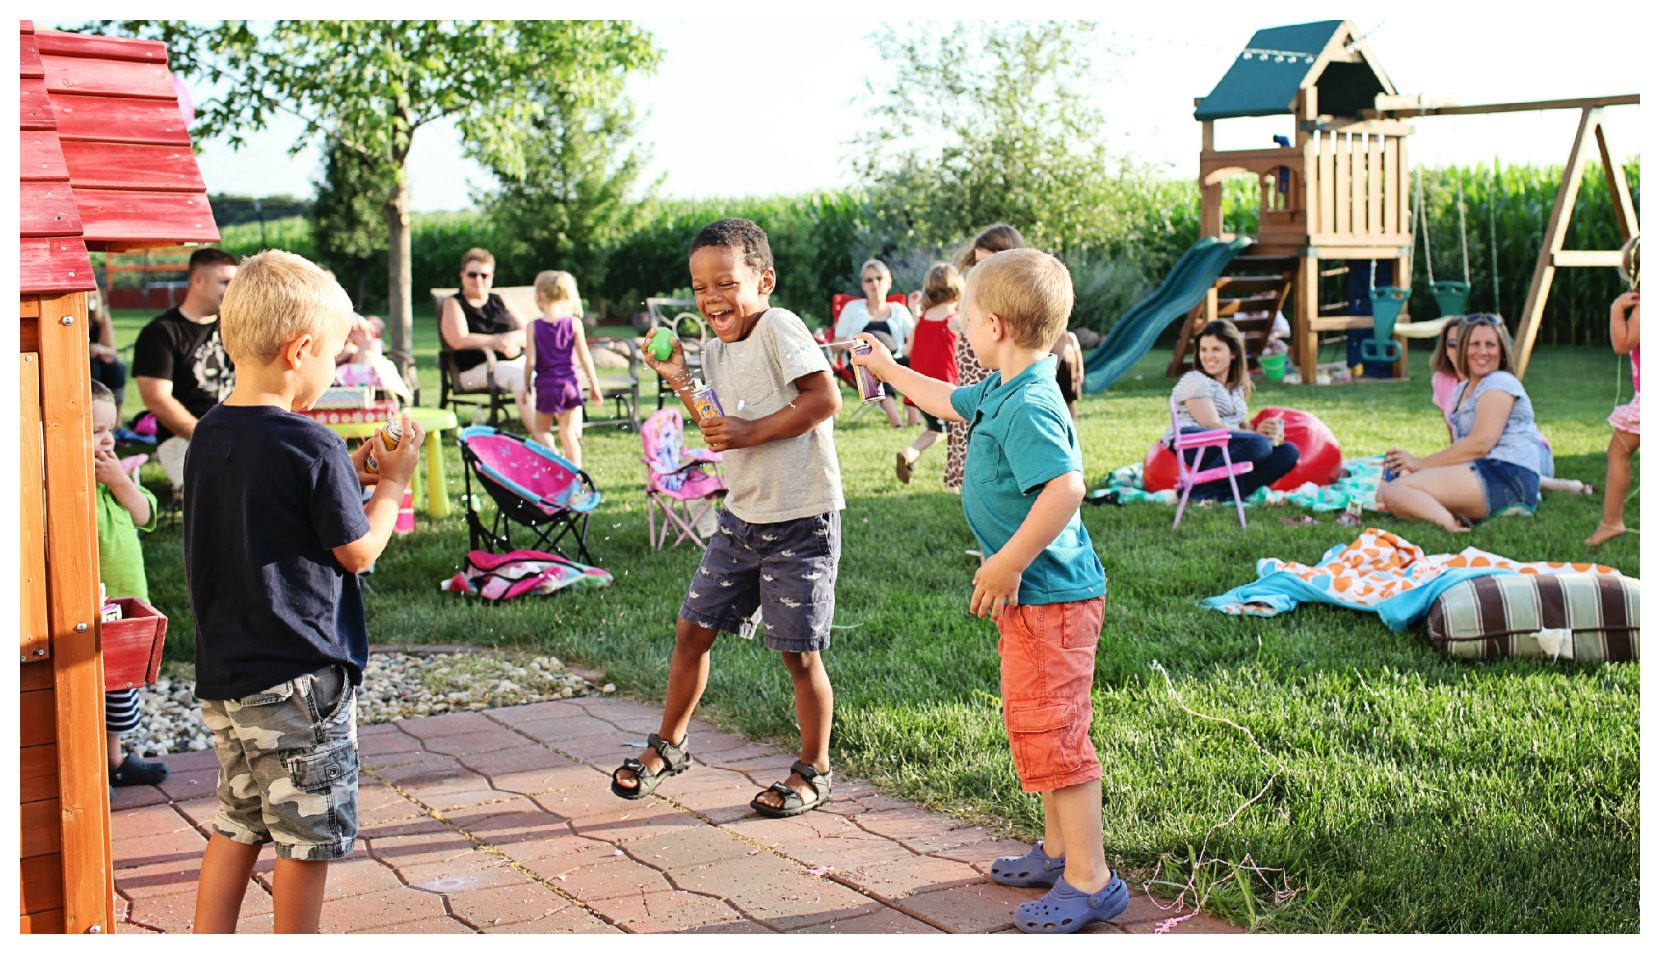 Outdoor Birthday Party Ideas For Toddlers
 Movie Night Birthday Party